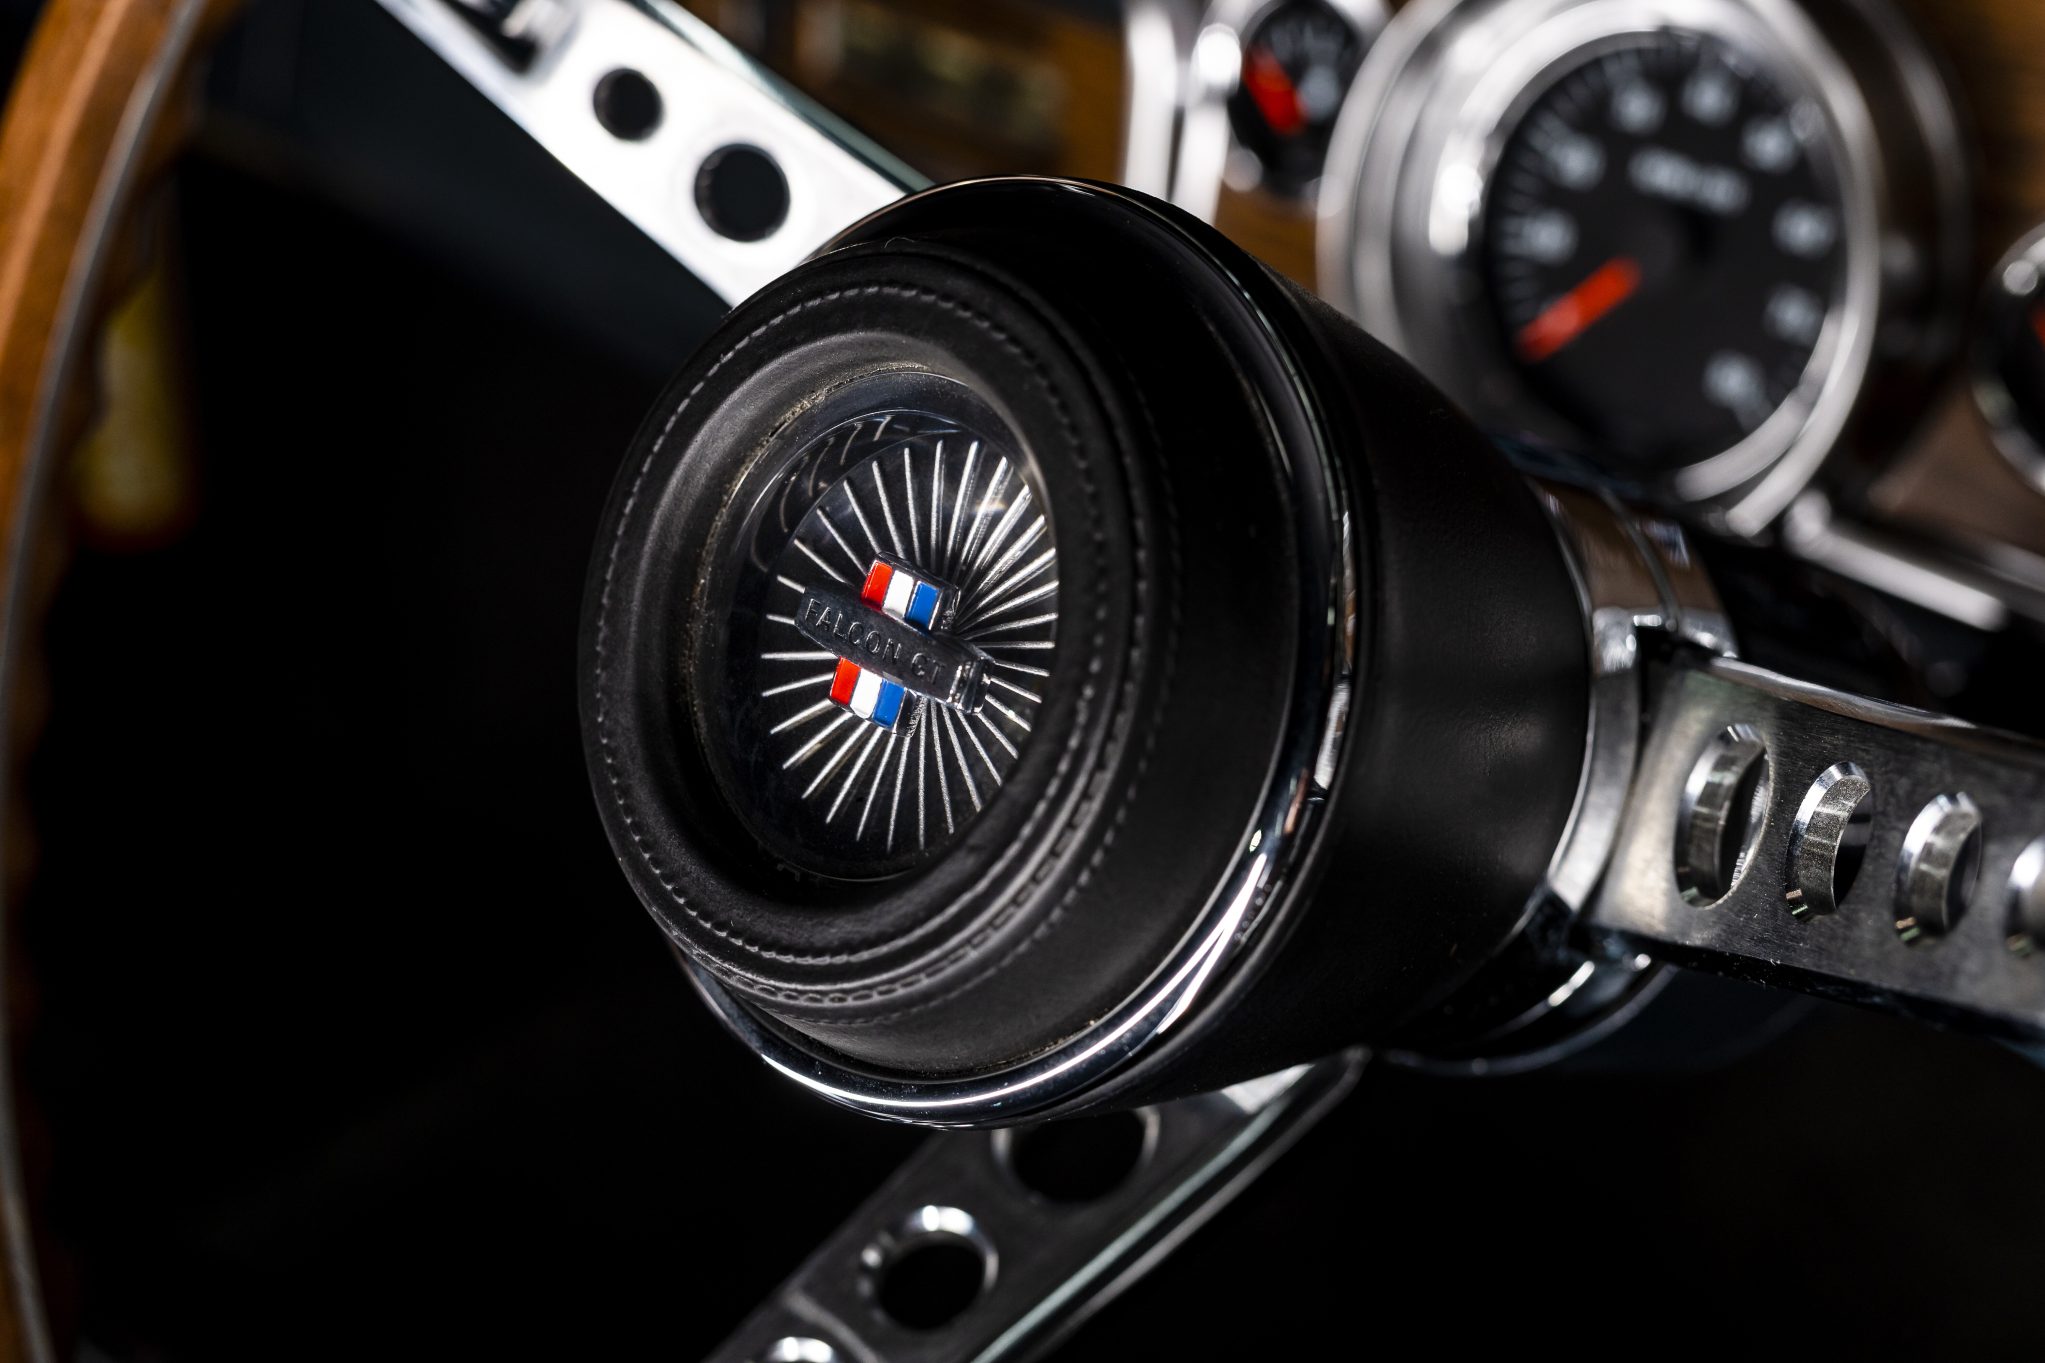 Street Machine Features Grant Connor Xr Falcon Steering Wheel